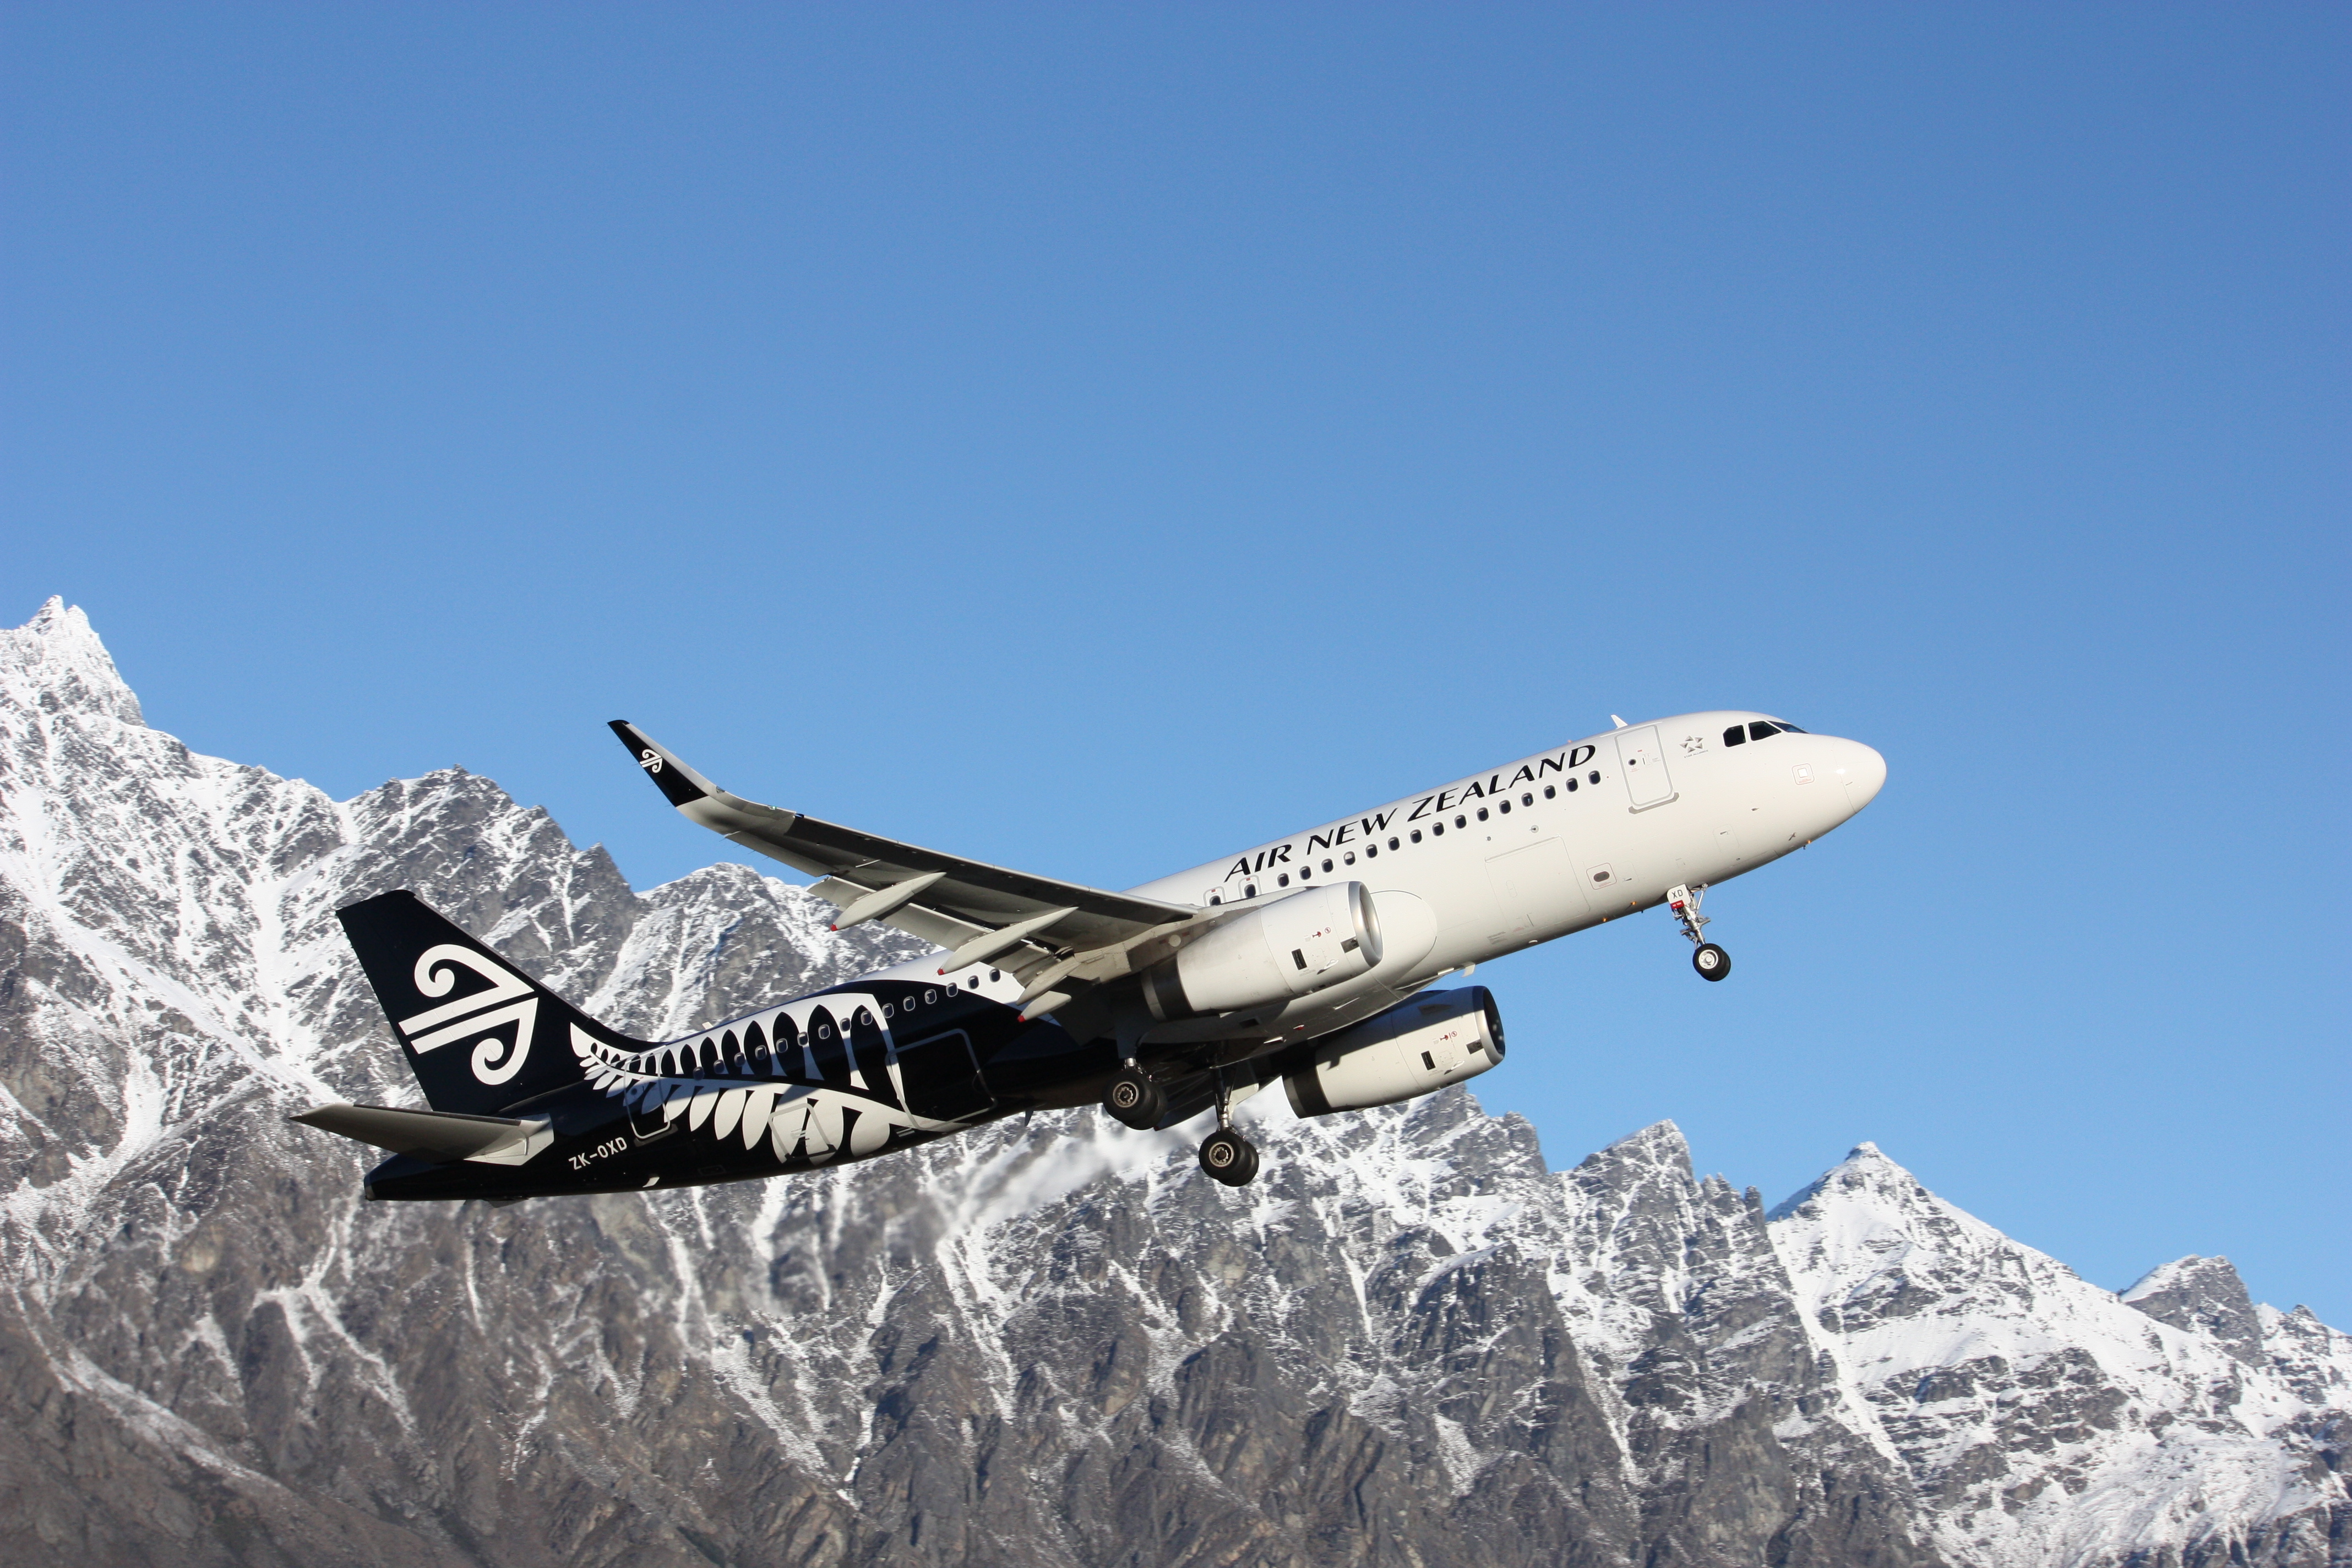 Airplane Air New Zealand take-off from Queenstown, August 16, 2014.